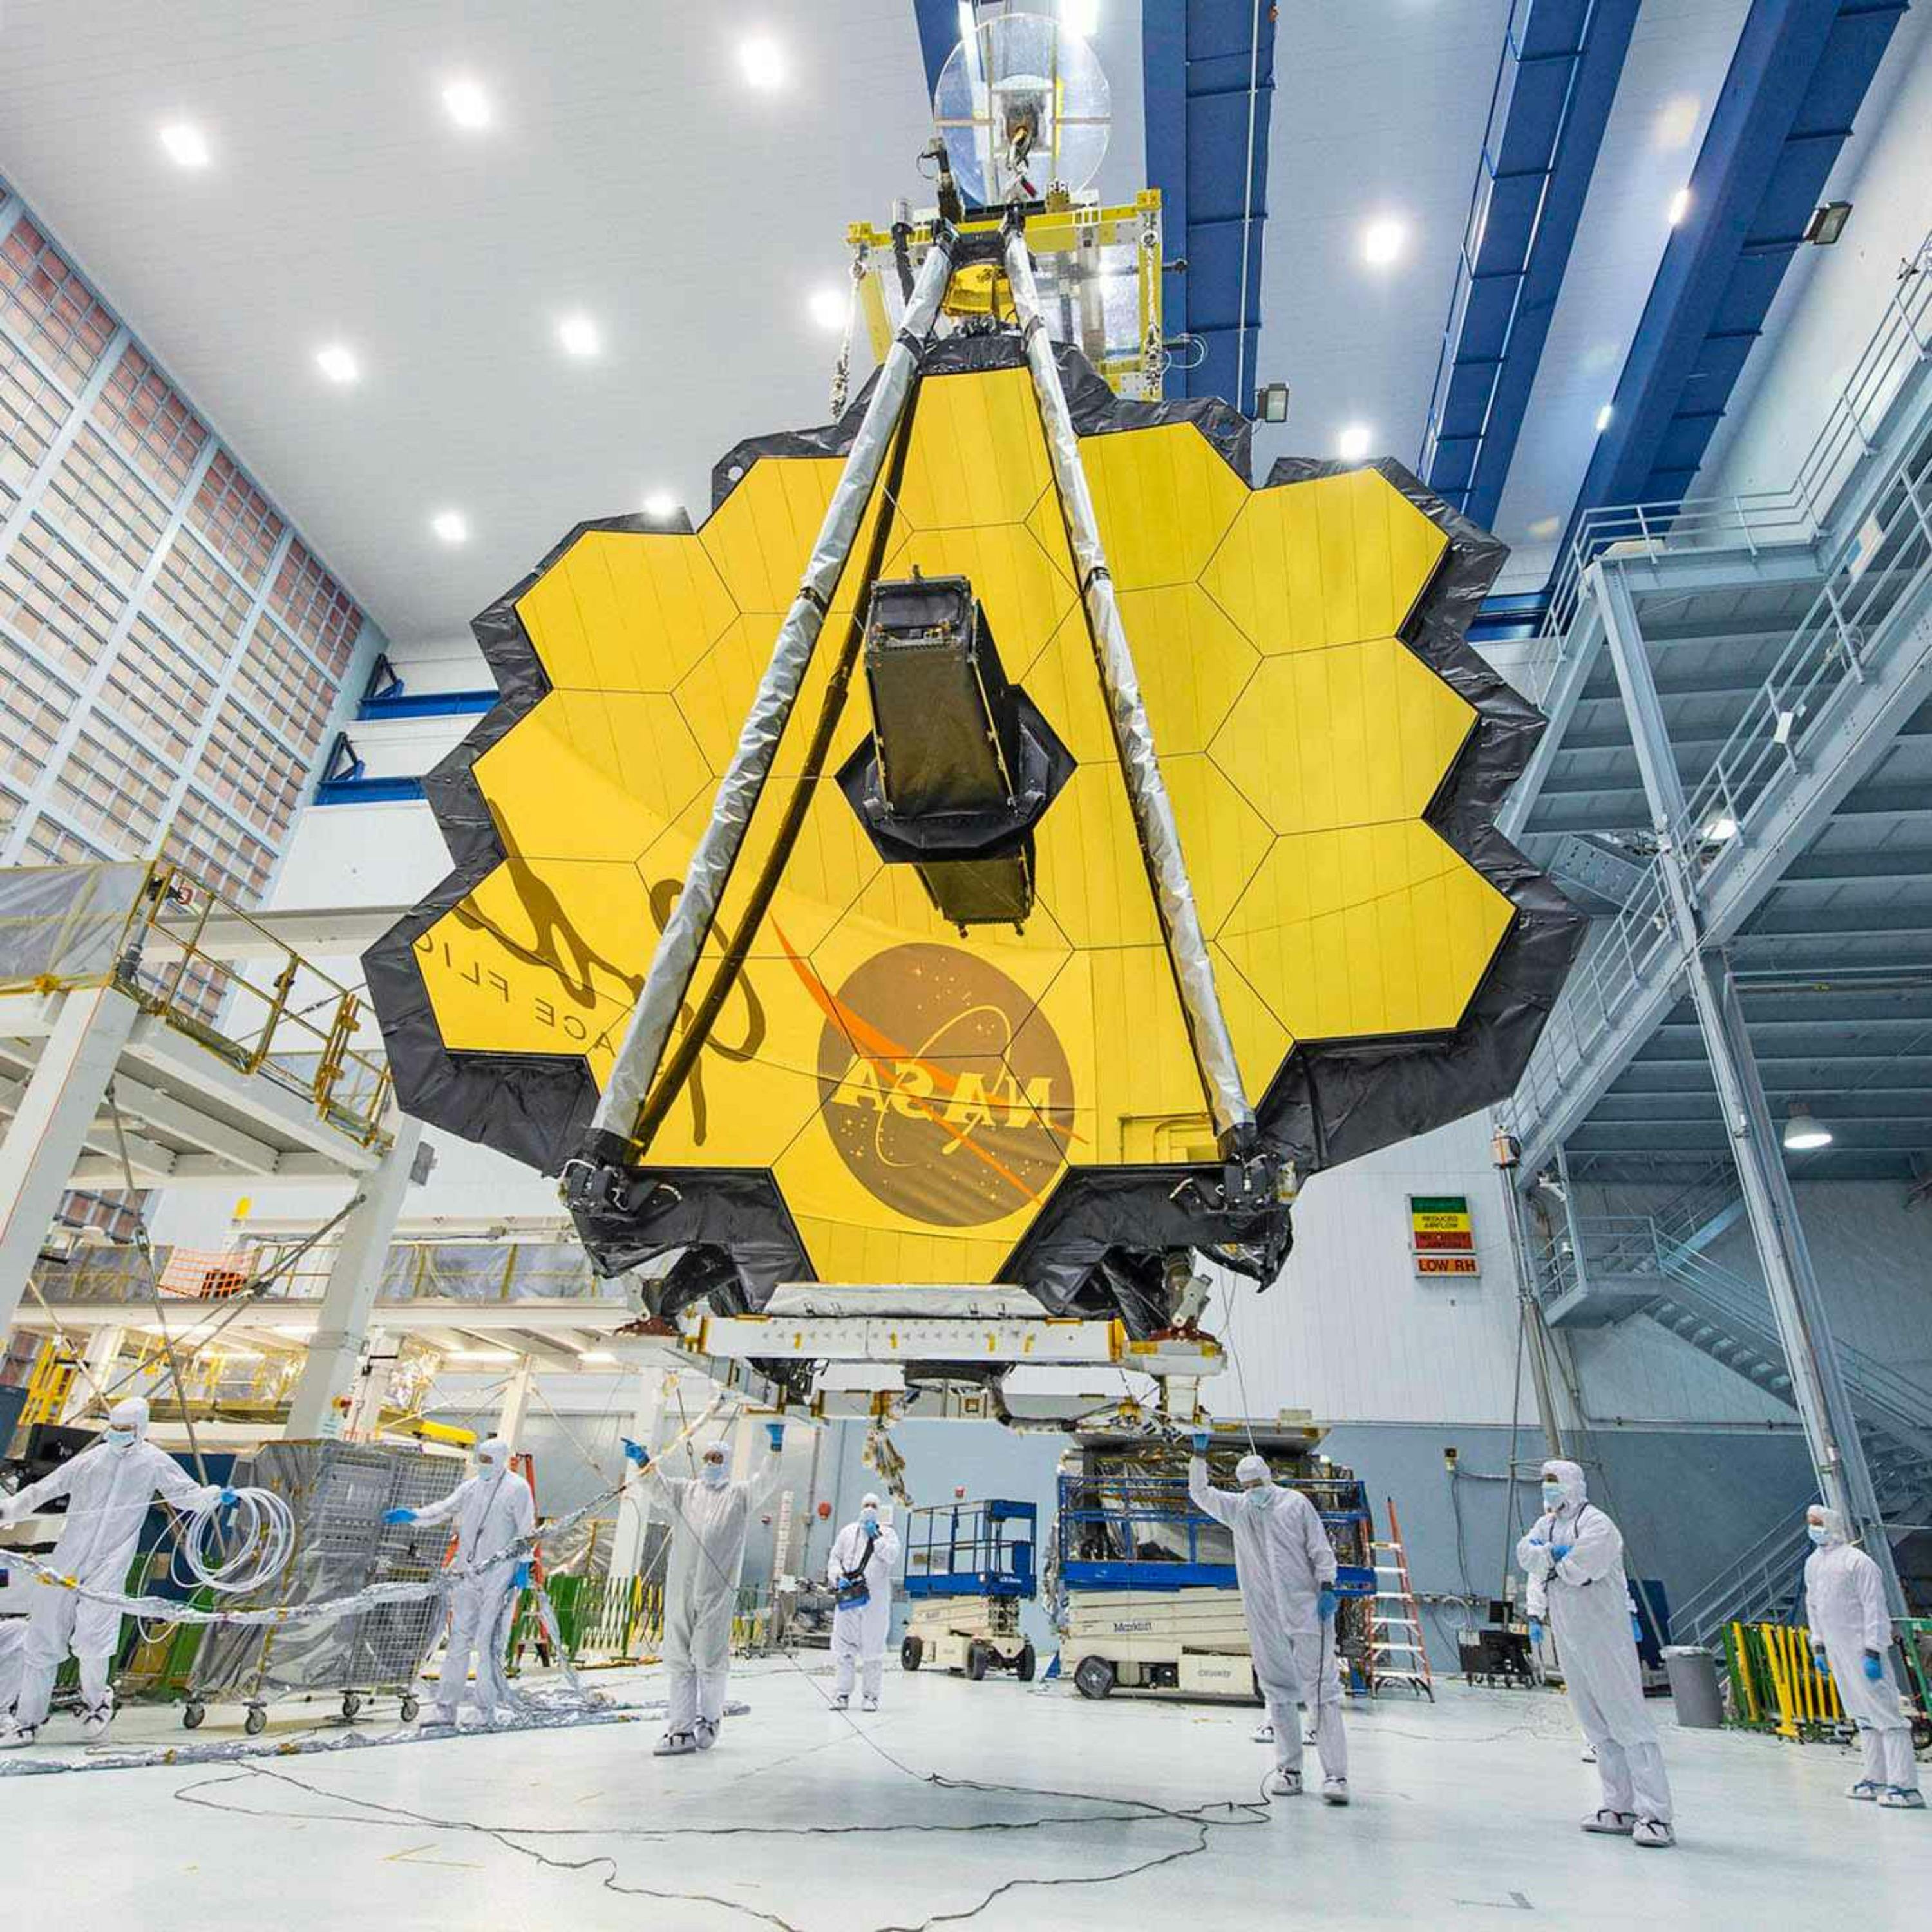 Launch of the James Webb Space Telescope